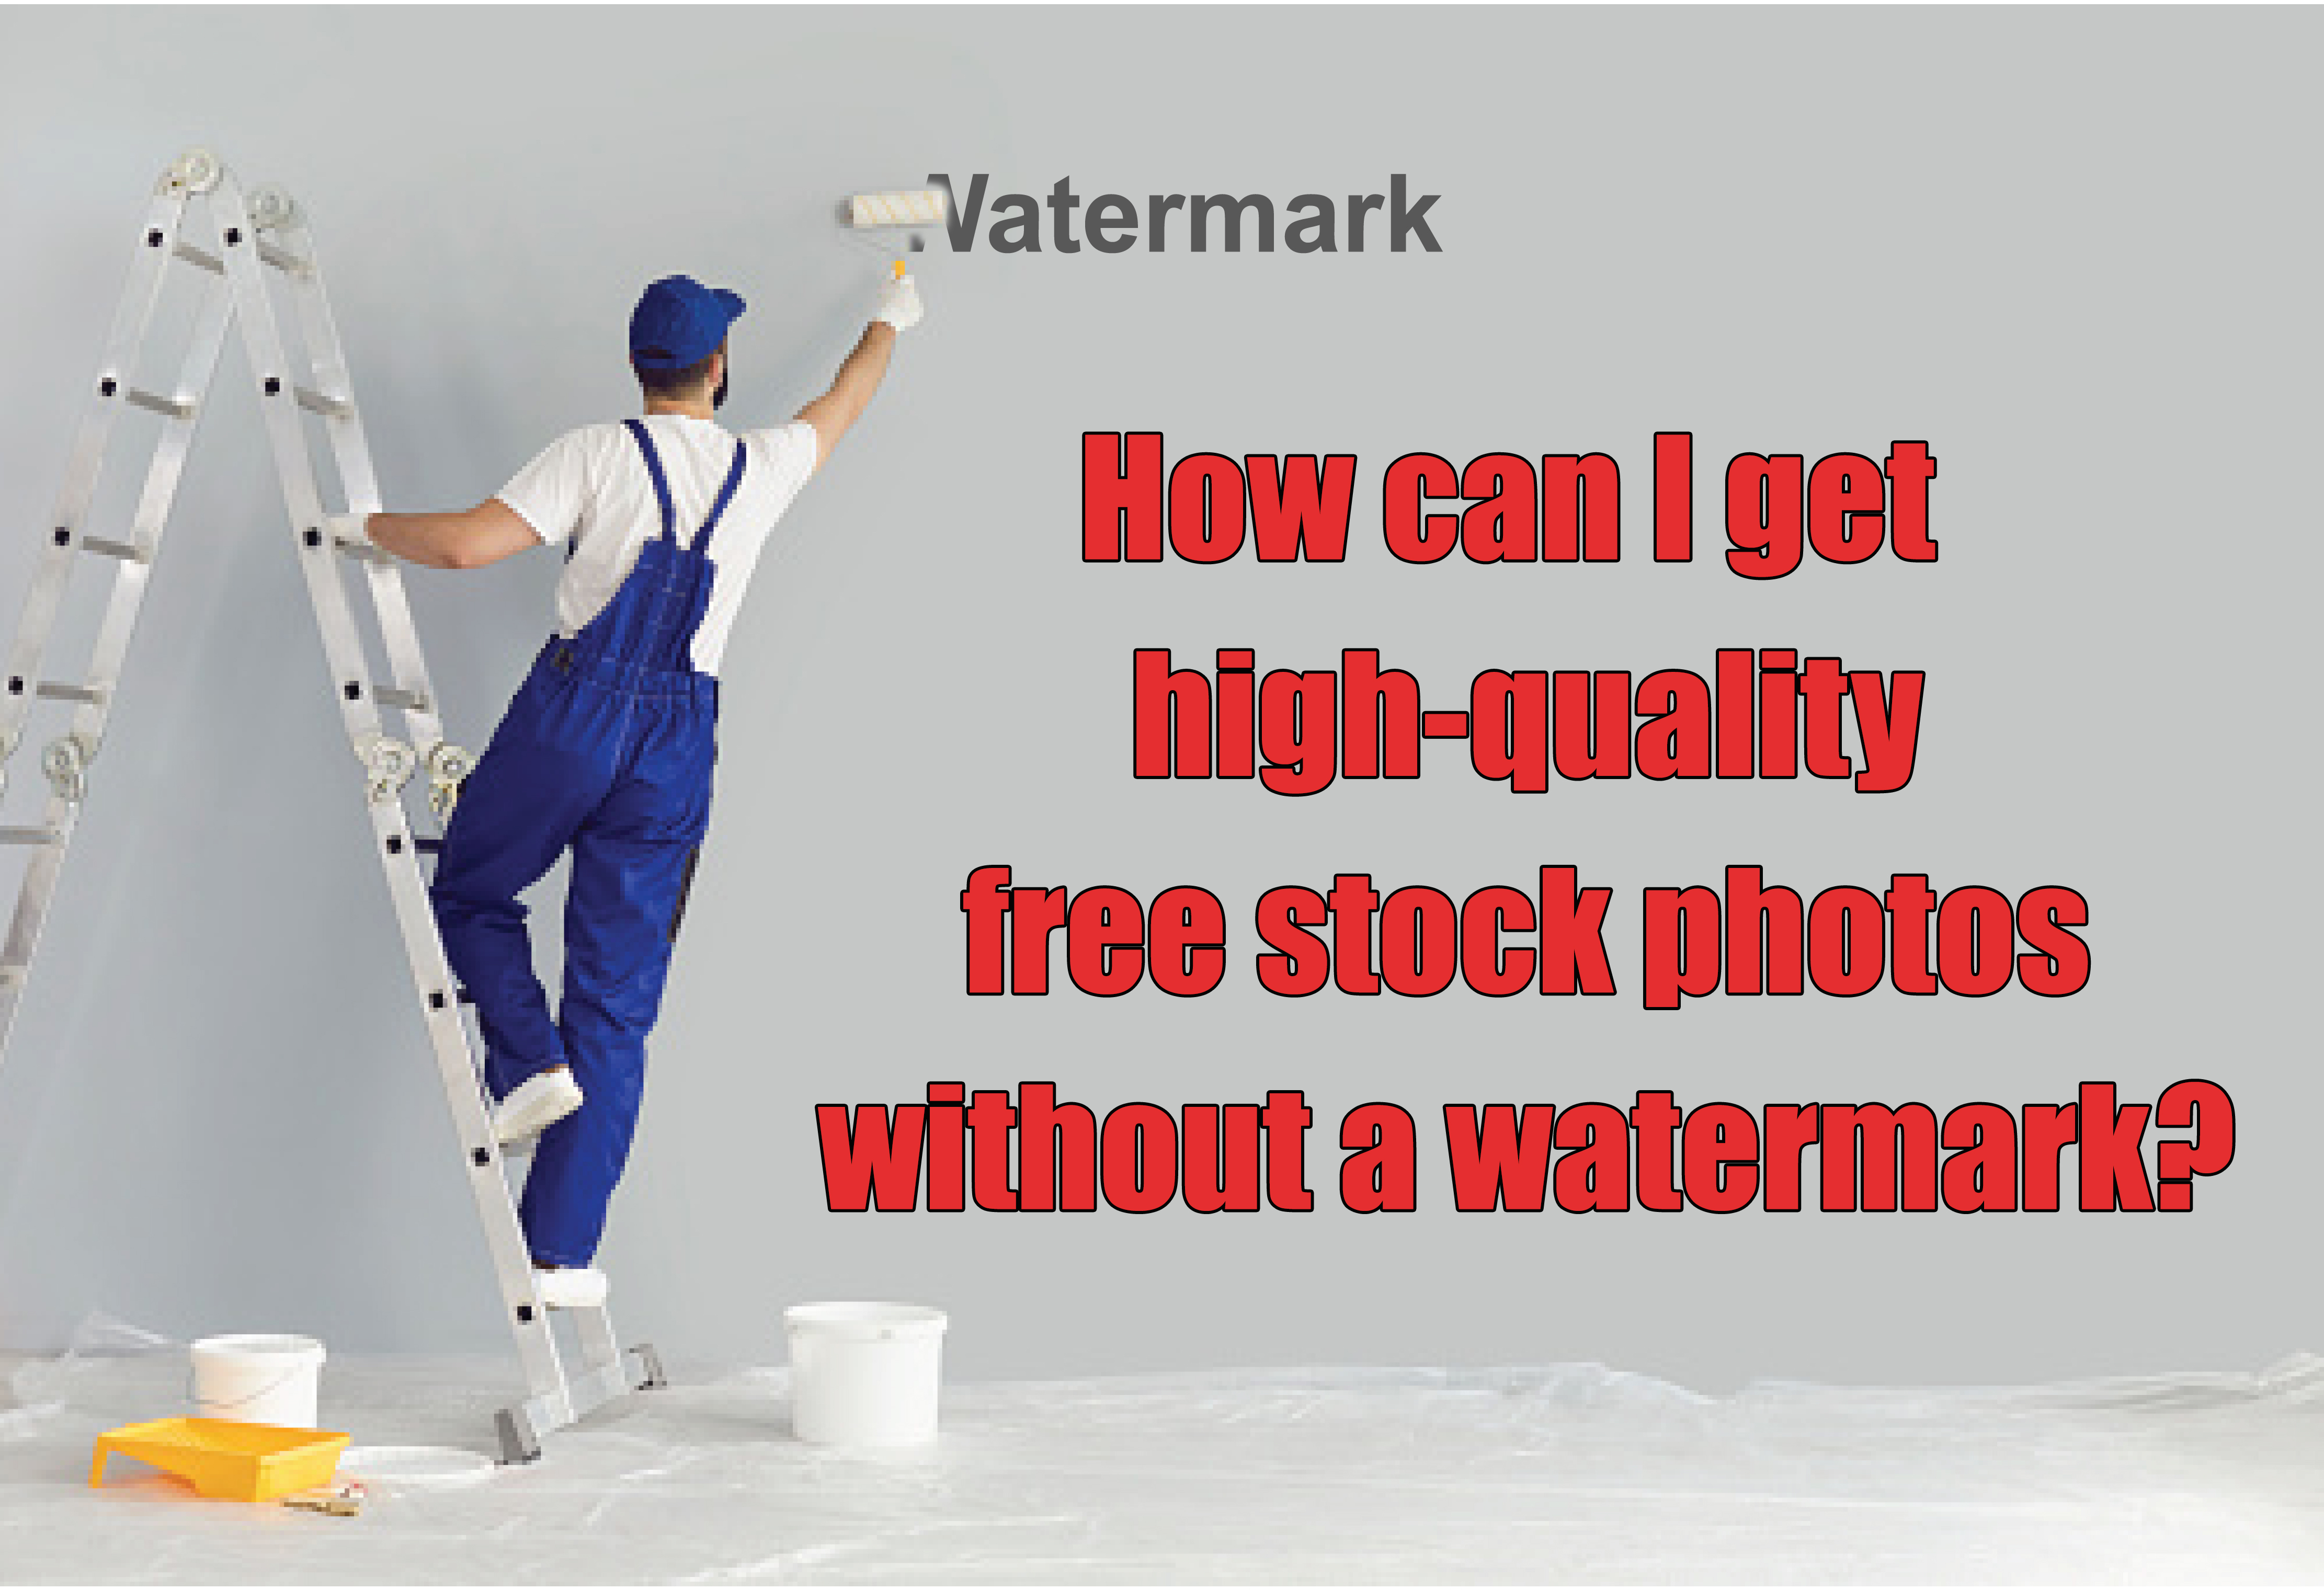 How can I get high-quality free stock photos without a watermark